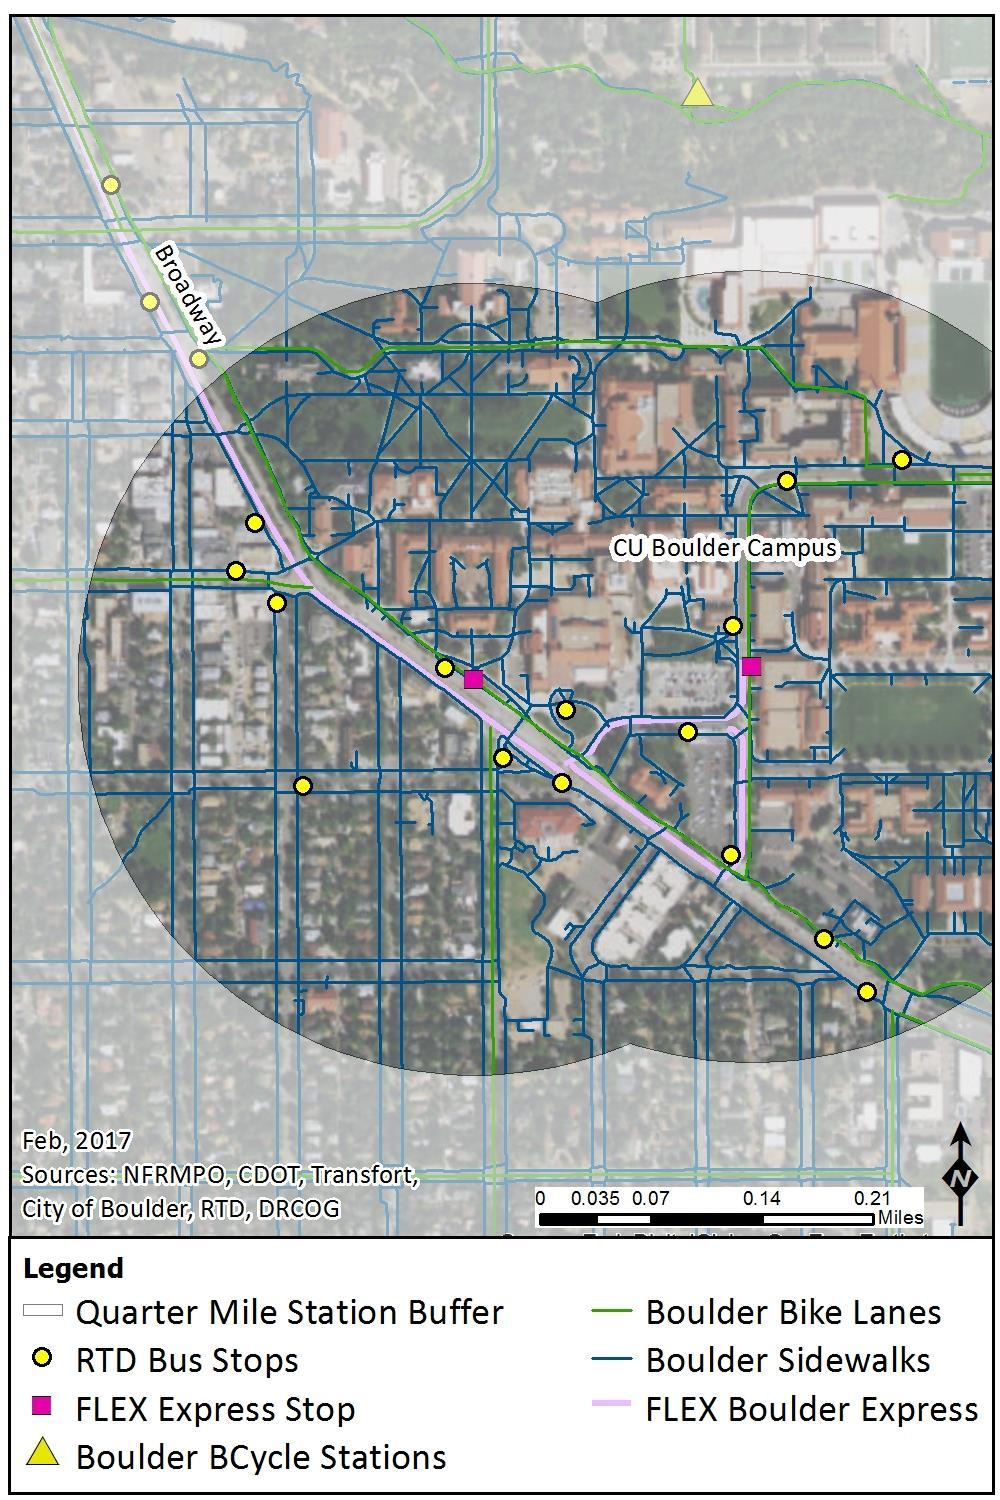 Sidewalks in adjoining neighborhoods and within the CU Boulder campus are dense as shown in Figure 3-23.